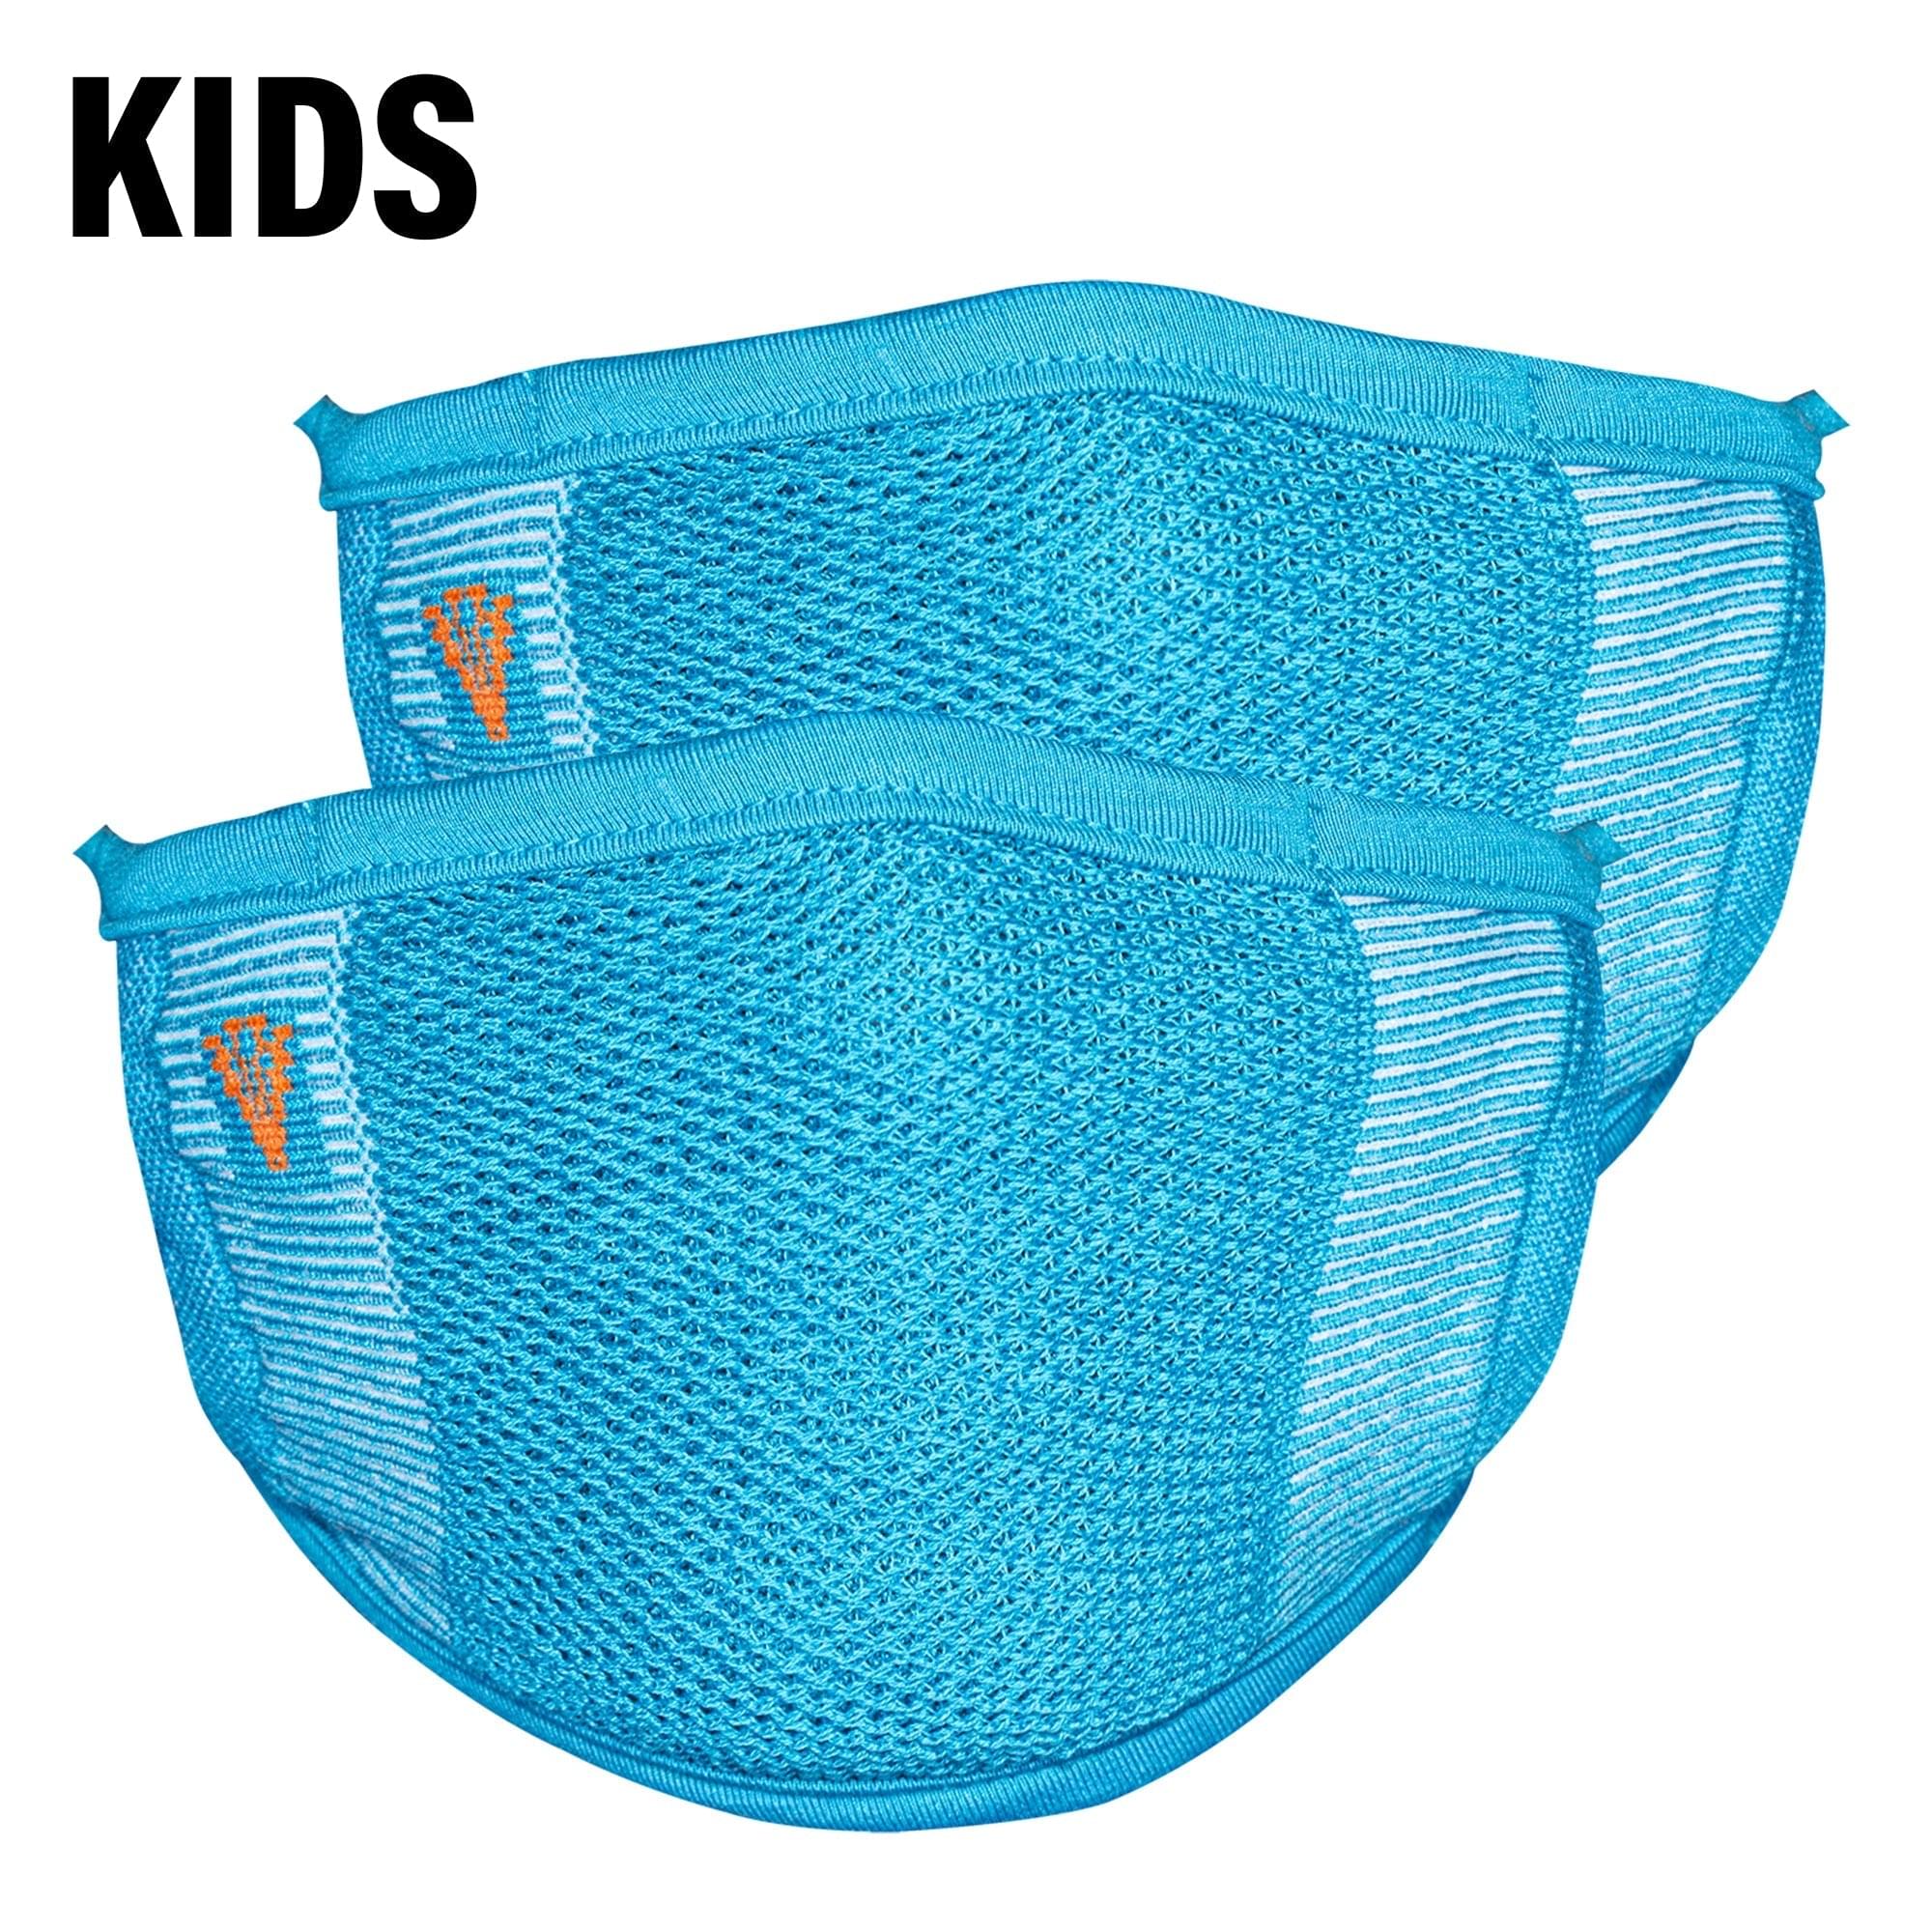 2-Layer Anti-Bacterial Protection Mask for Kids, Fashion Coloured -Size - Medium (8-12 Yrs) - Pack of 2